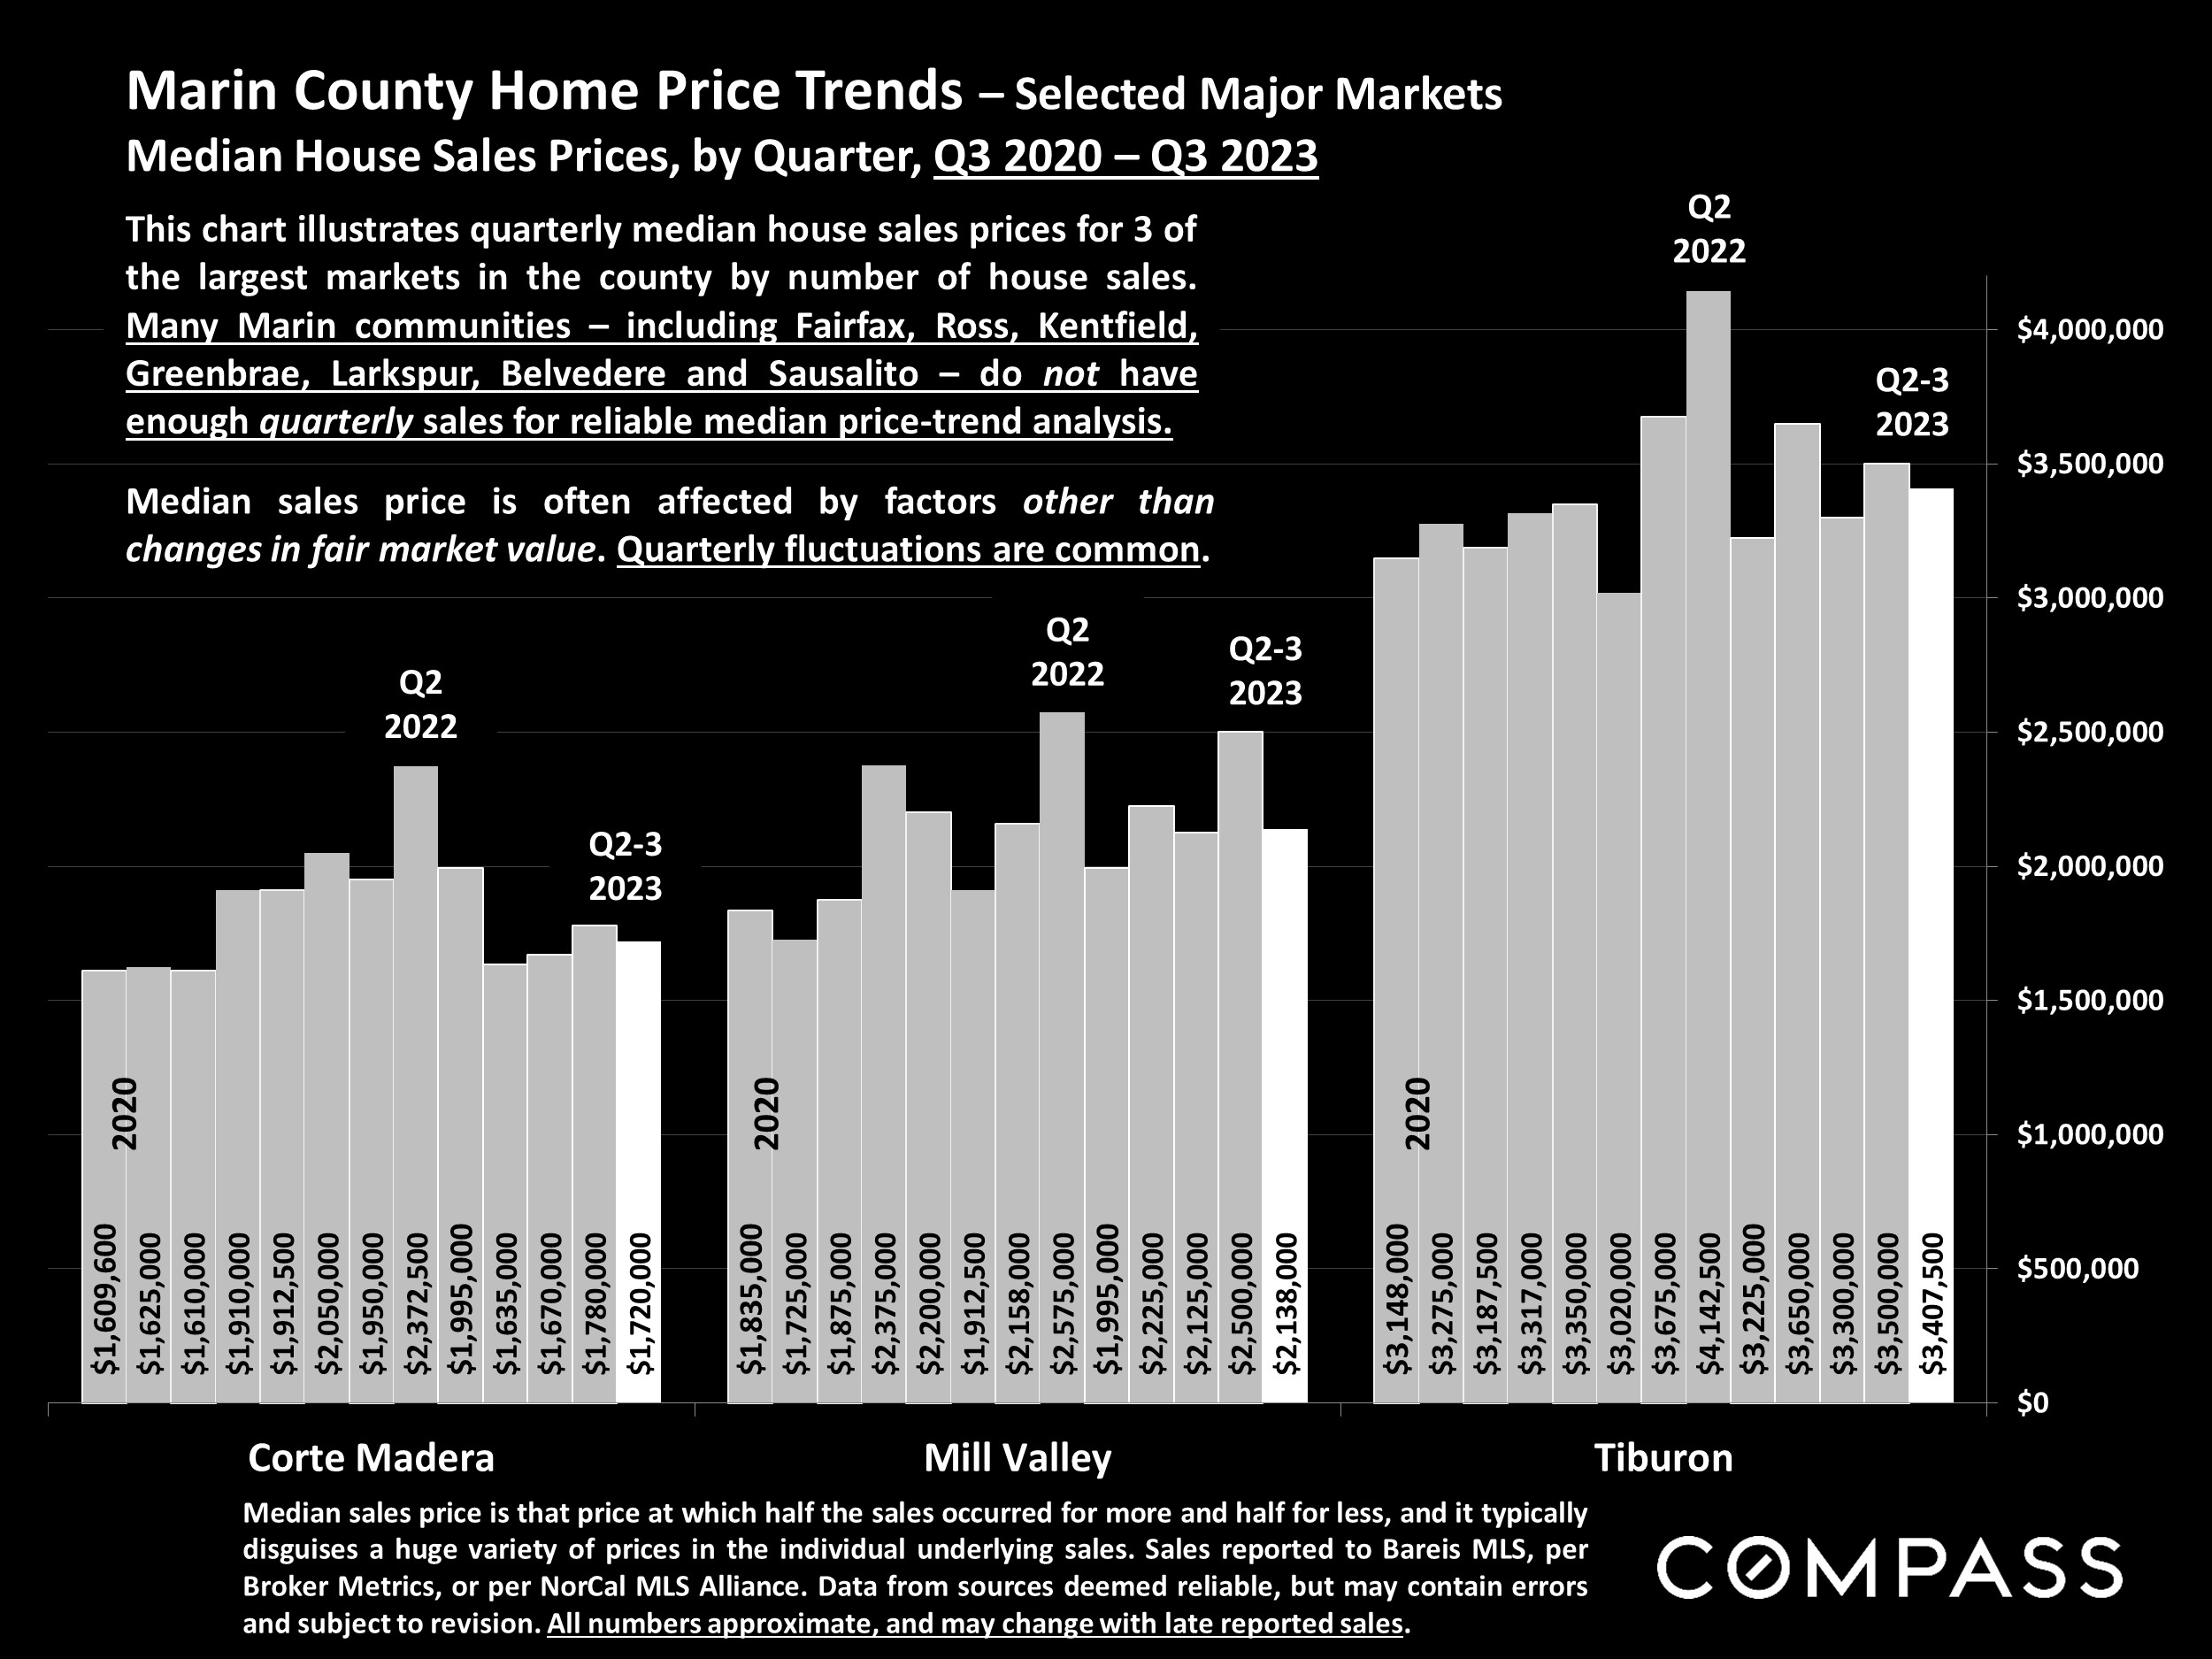 Marin County Home Price Trends - Selected Major Markets.Median House Sales Prices, by Quarter, Q3 2020 - Q3 2023